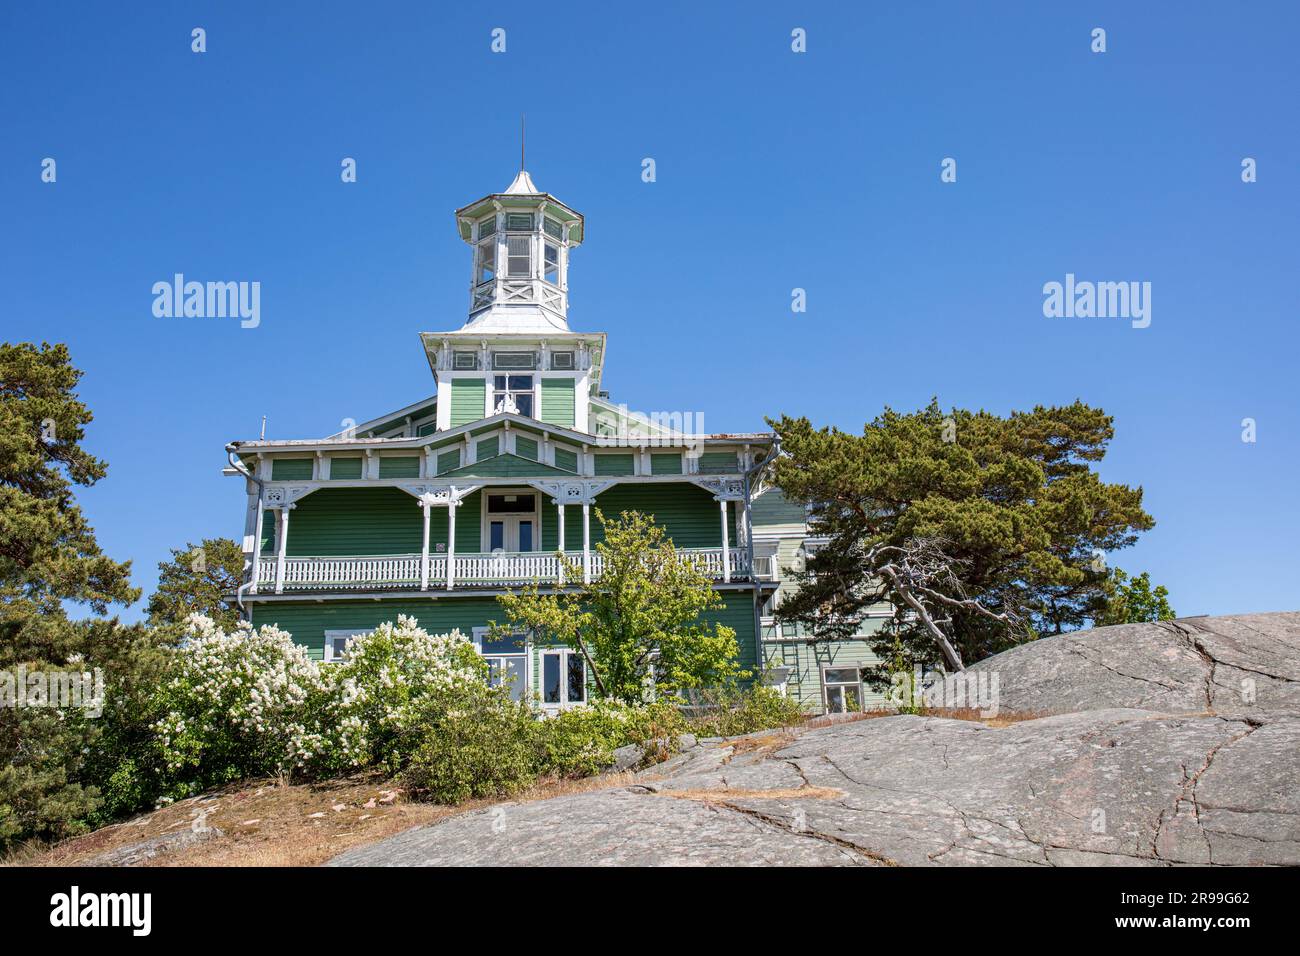 Boardinghouse Villa Tellina agains clear blue sky on a sunny summer day in Hanko, Finland Stock Photo